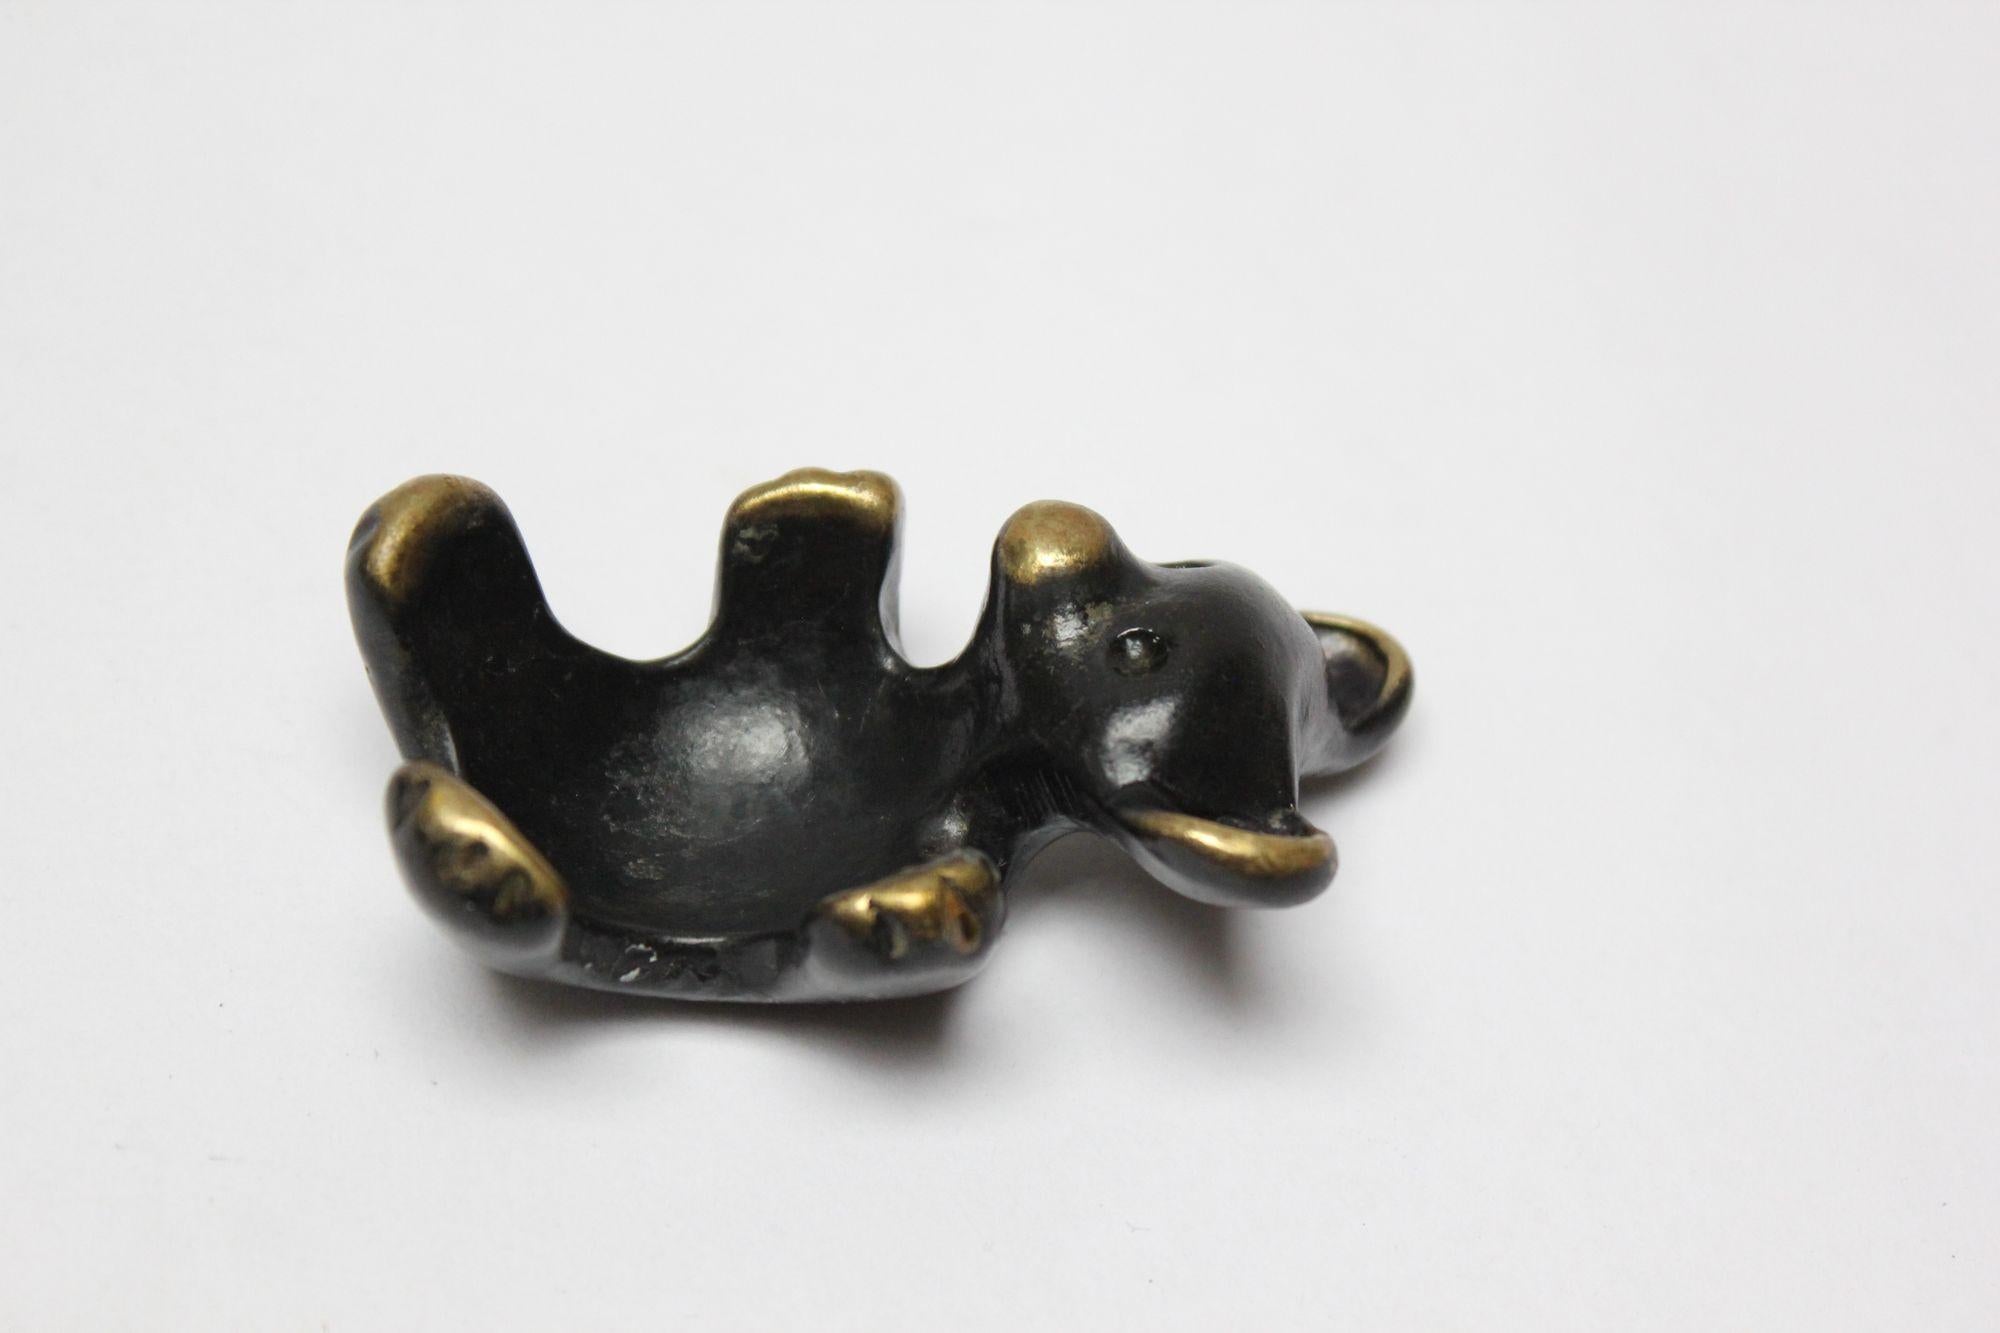 Patinated Blackened Brass Bear Candleholder/Figurine by Walter Bosse and Herta Baller For Sale